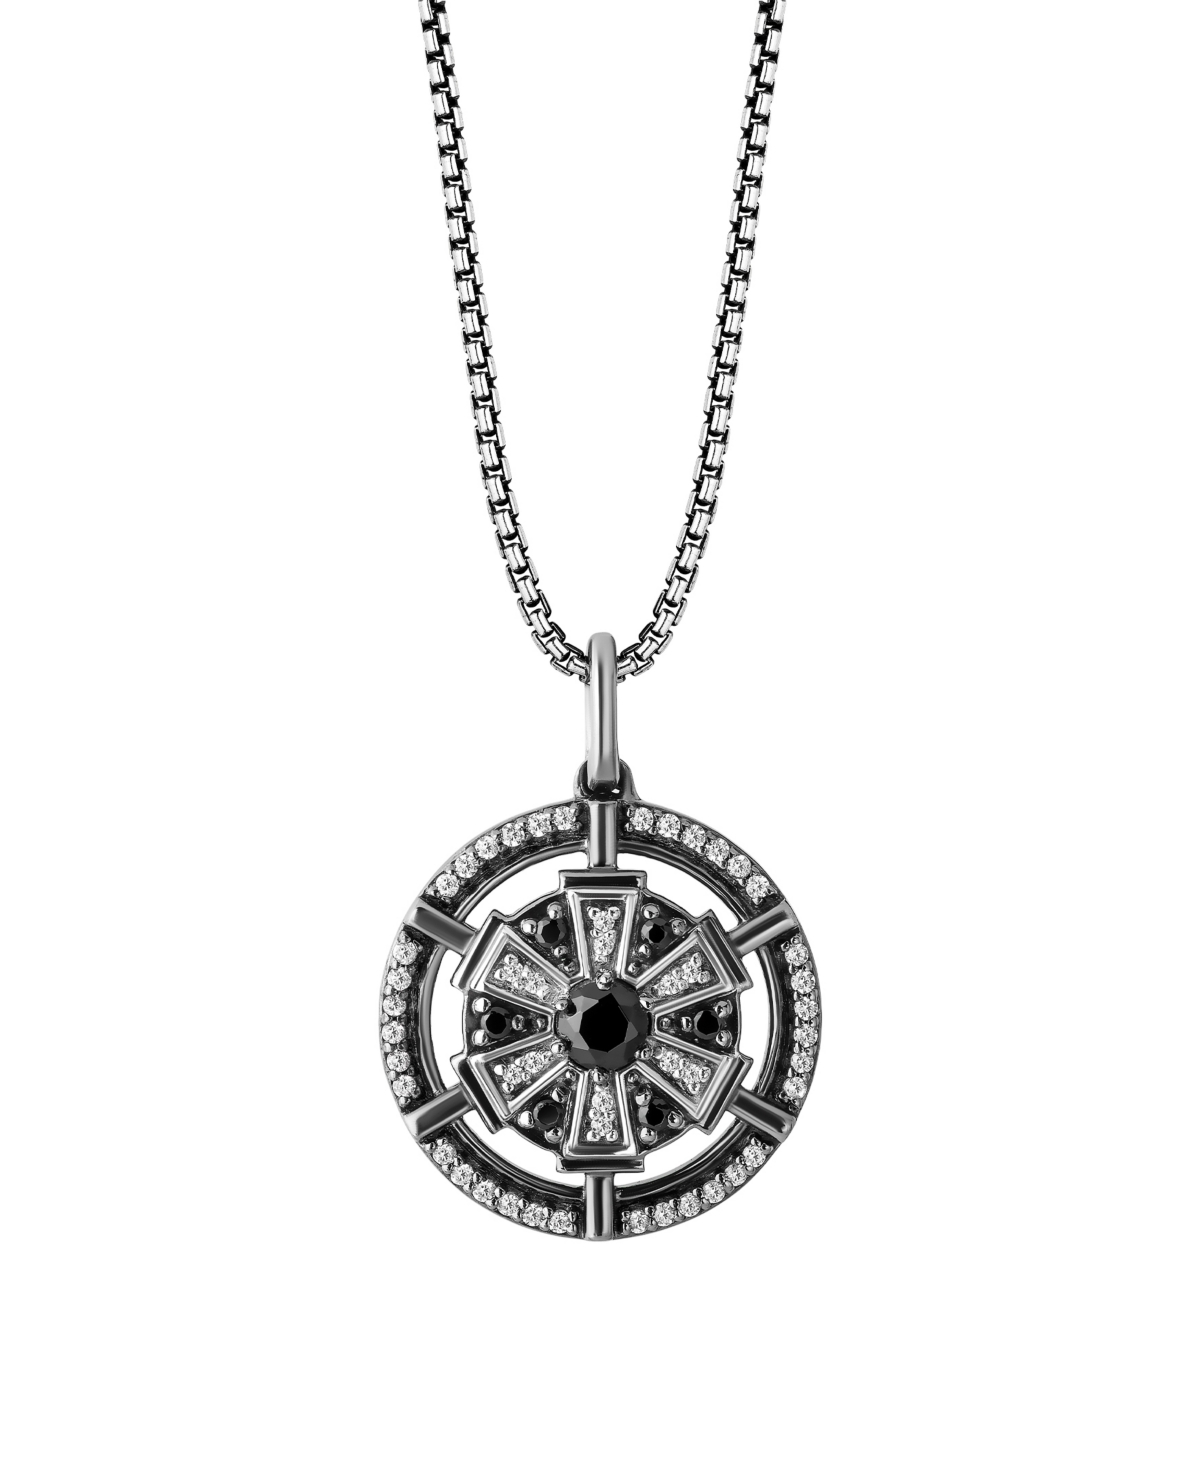 Star Wars The Imperial Diamond Pendant Necklace (1/4 Ct. T.w.) In Black Rhodium Over Sterling Silver